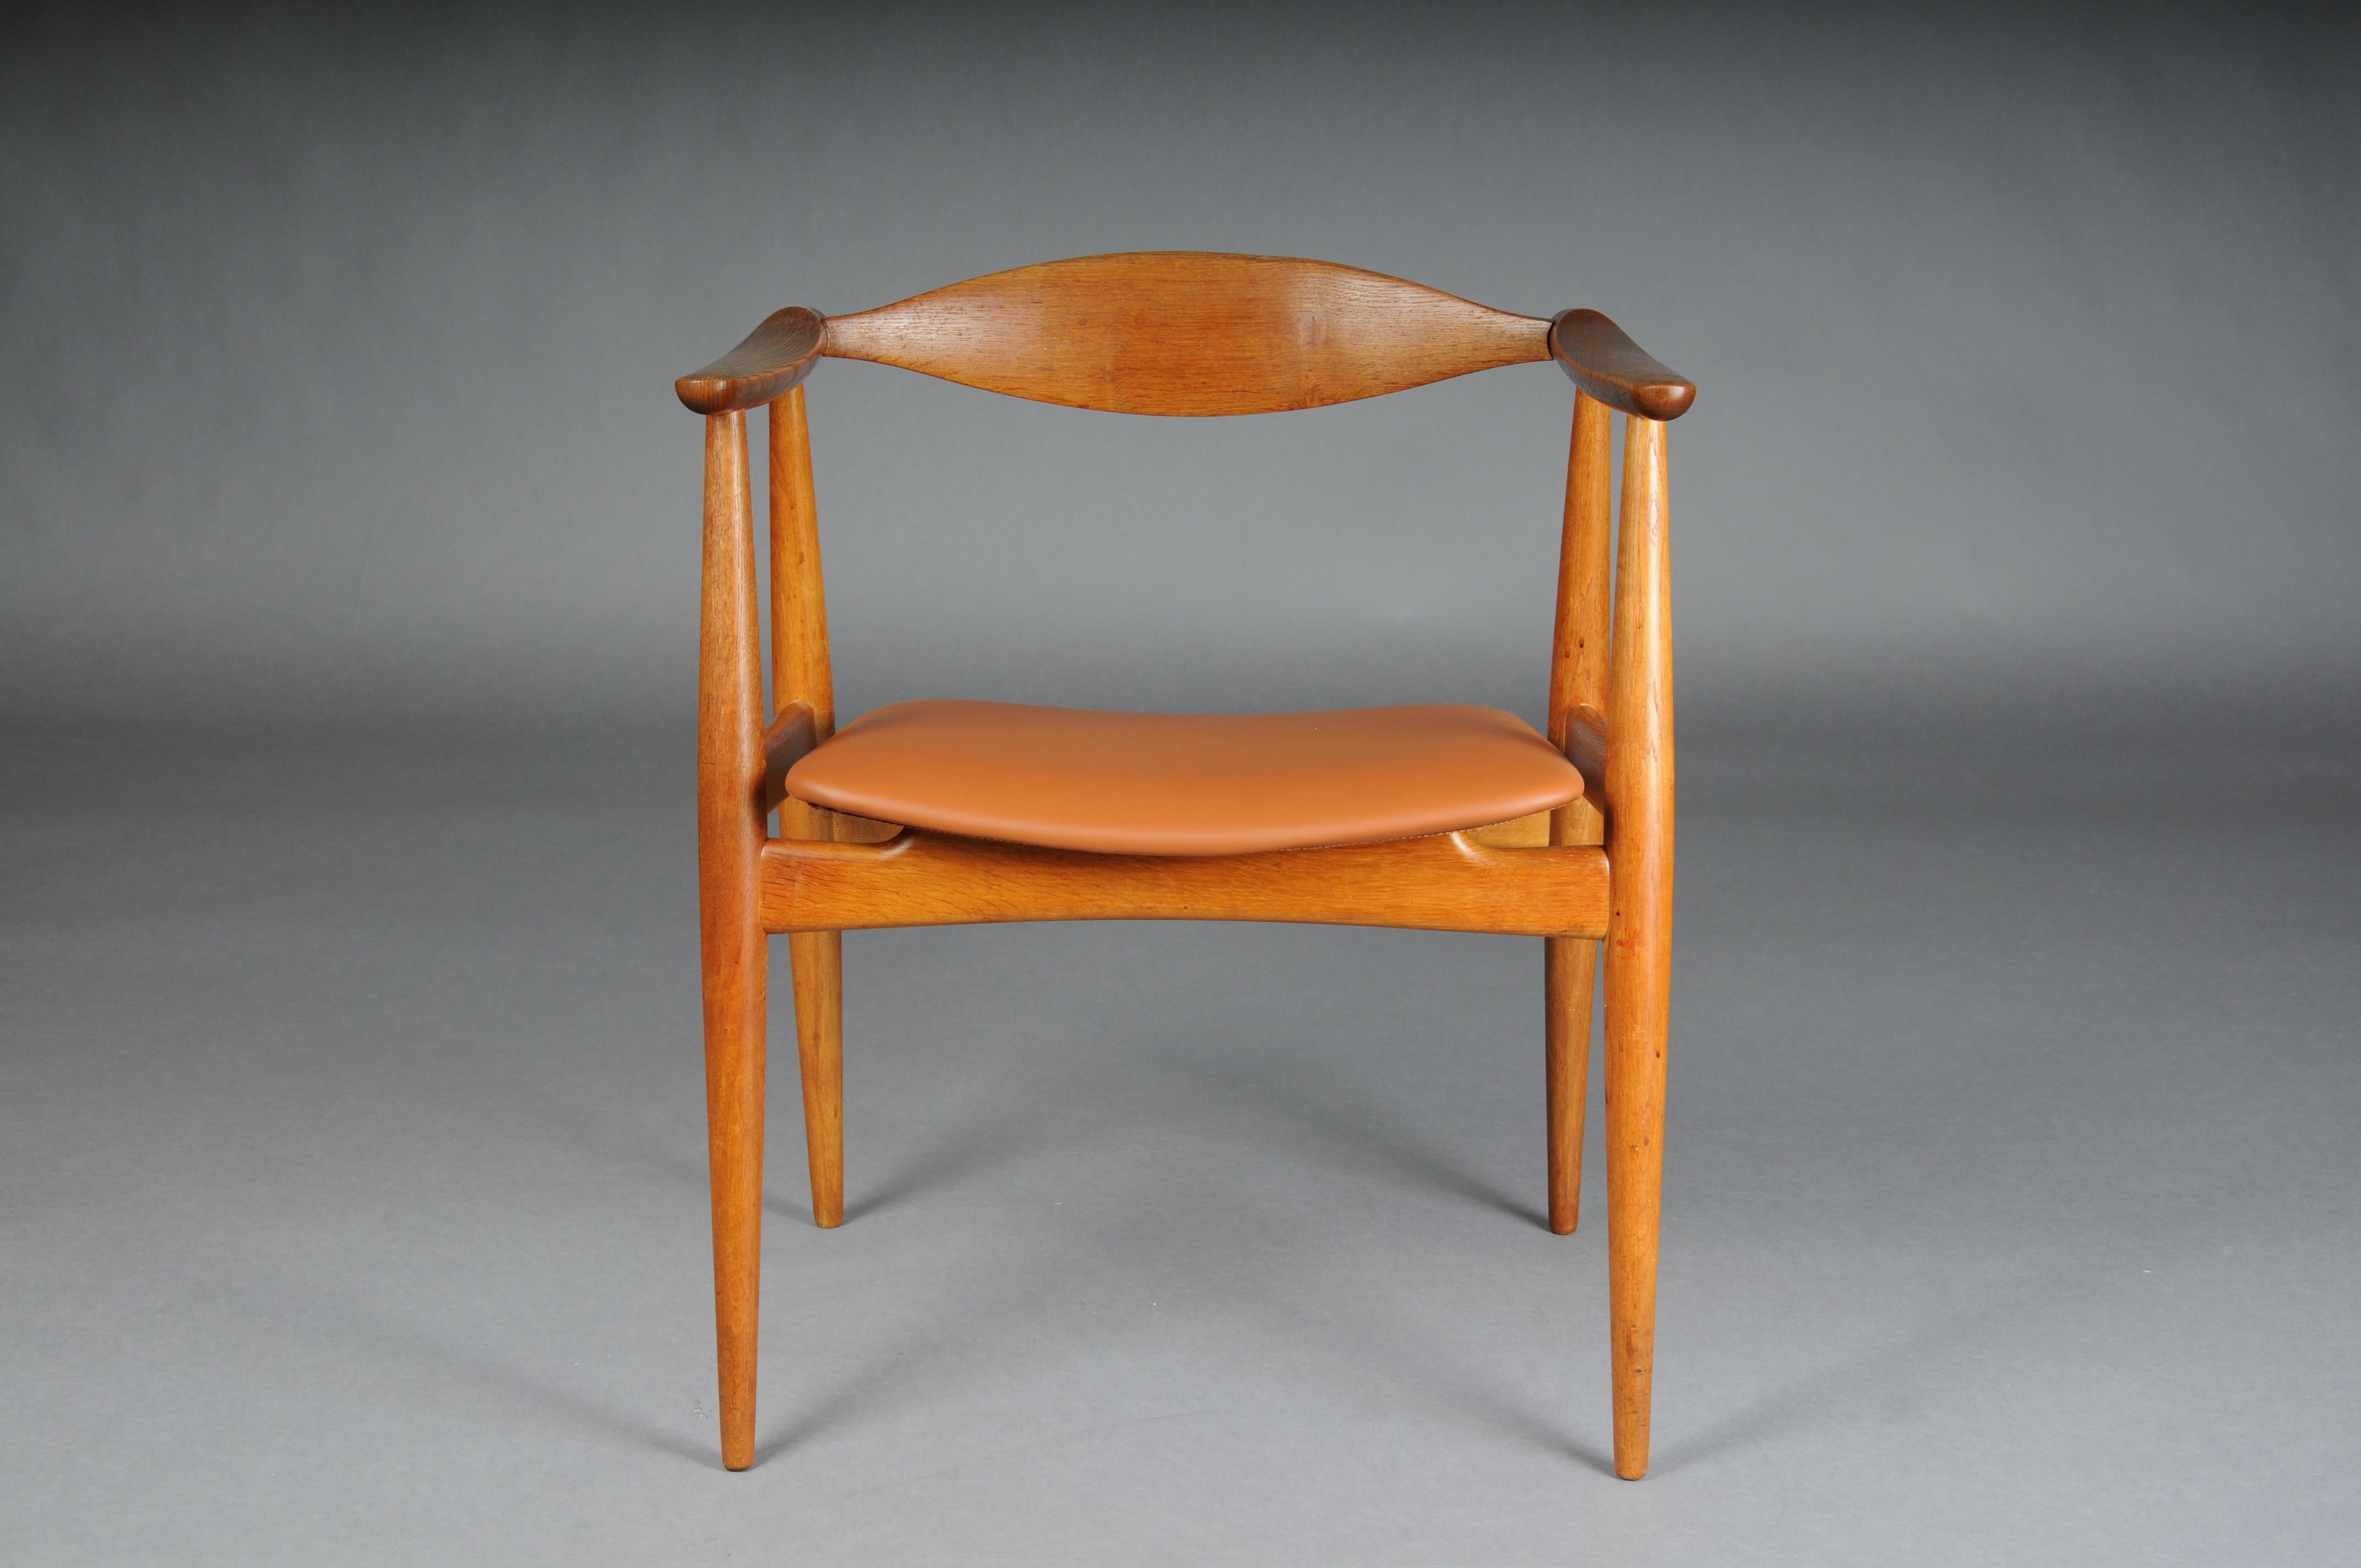 HANS J. WEGNER. Armchair, Teak/leather, Model CH-35, Carl Hansen & Son, Denmark.

Very rare chair by Hans Wegner, manufactured by Carl Hansen and Son, model CH35.

An absolute design classic with a very high recognition value.

The seat has been